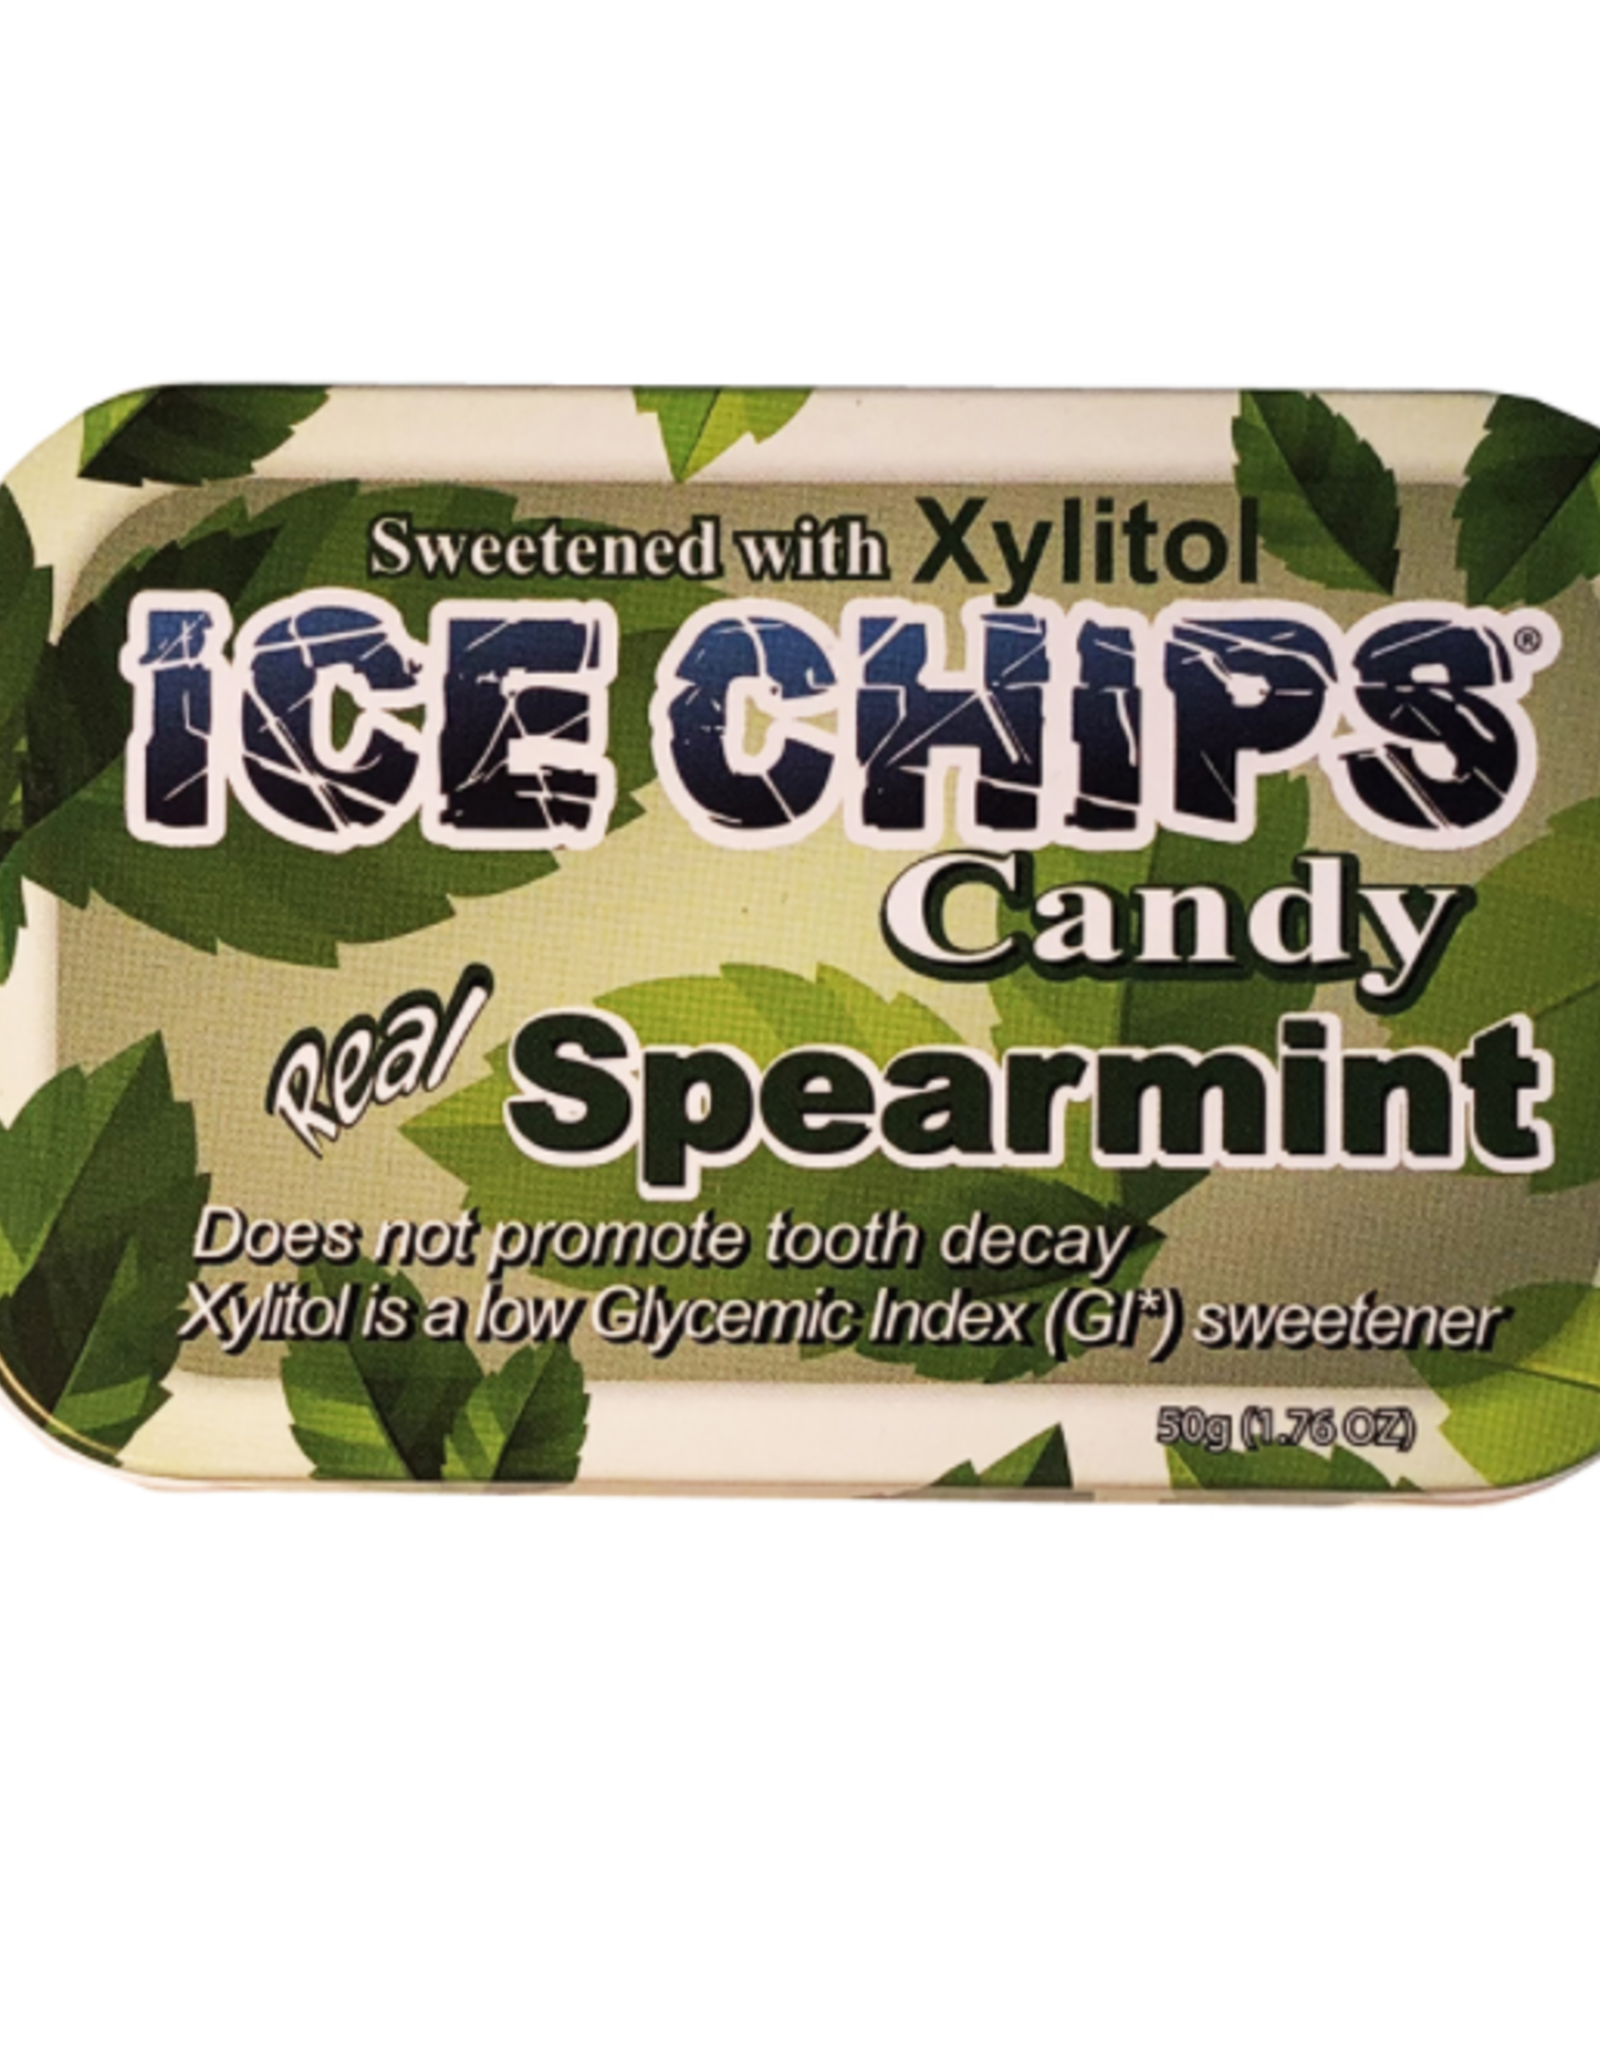 Ice Chips Ice Chips Spearmint